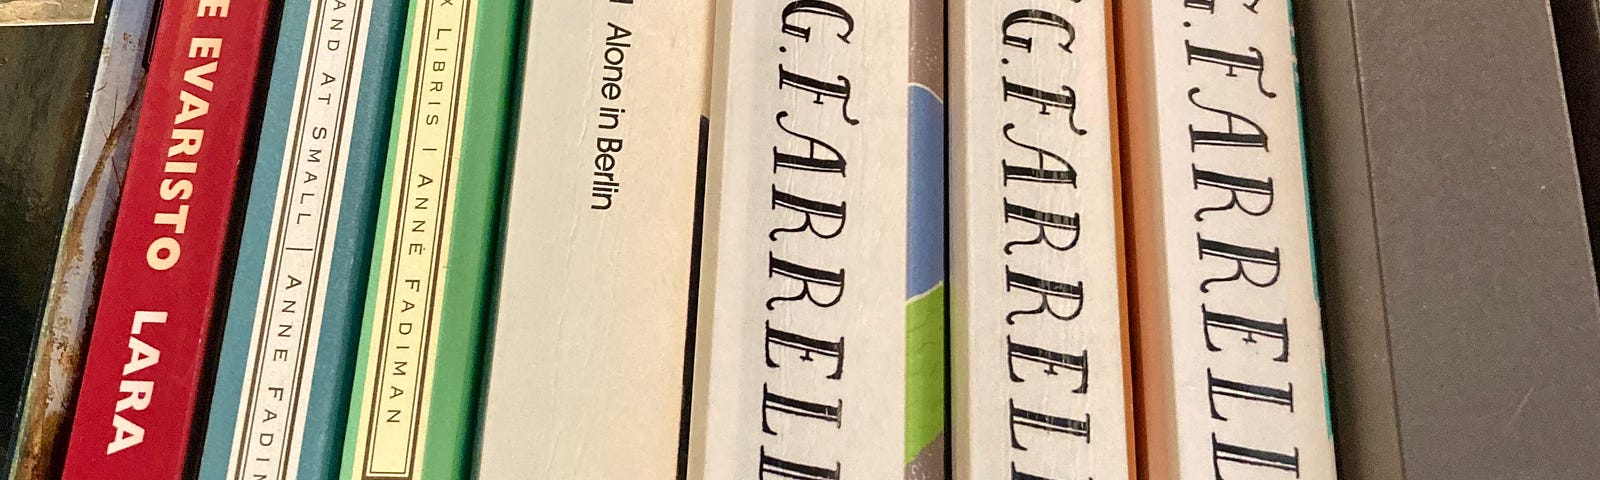 Book spines on a books shelf; three books by J. G. Farrell